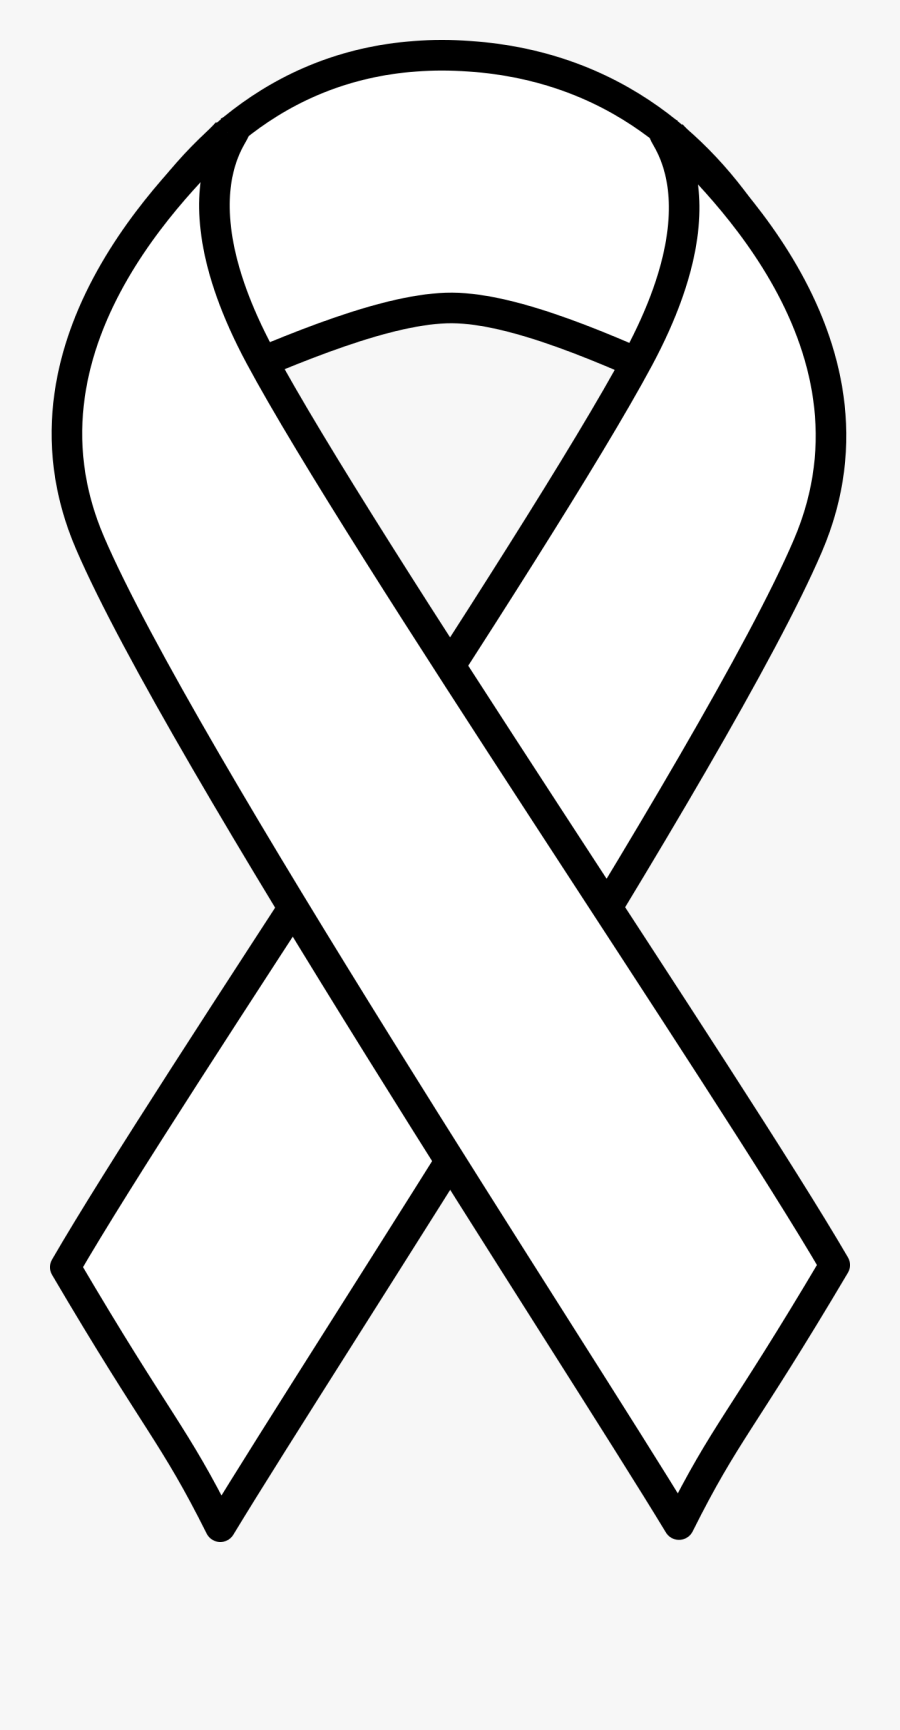 White Lung Cancer Ribbon - Cancer Ribbon Black And White, Transparent Clipart